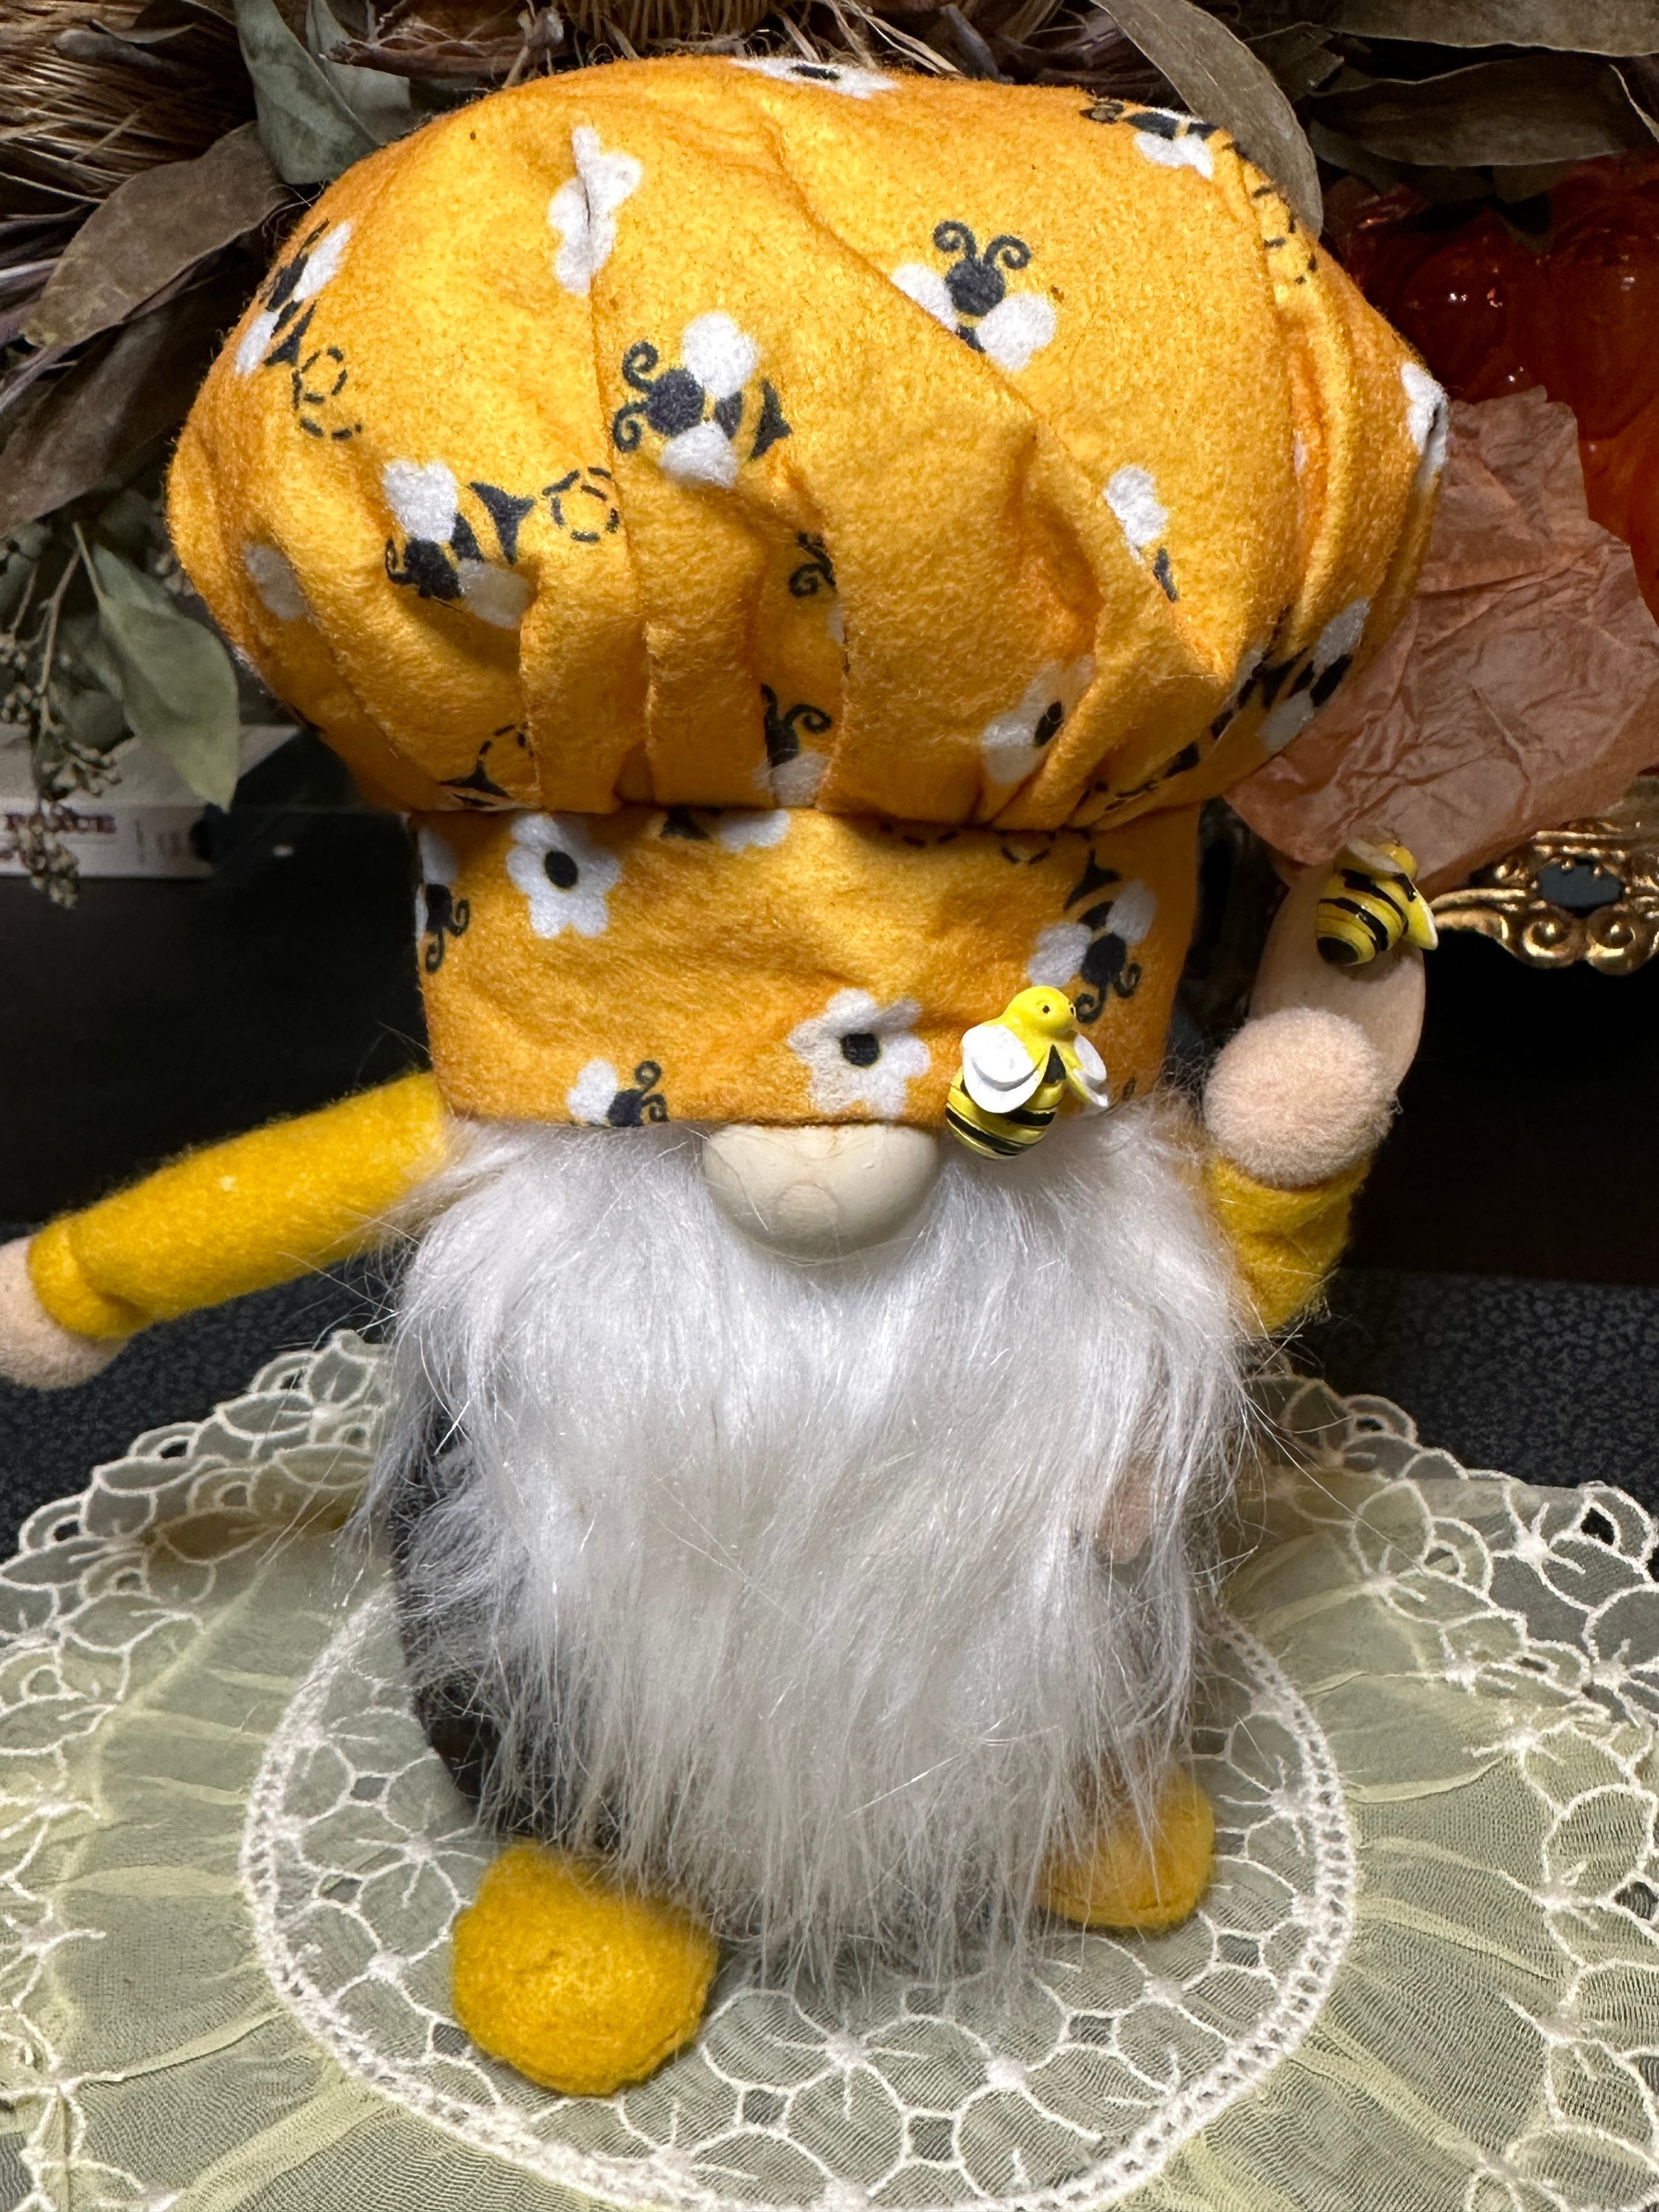 Hot Selling Bumble Bee Chef Gnome Scandinavian Tomte Nisse Honey